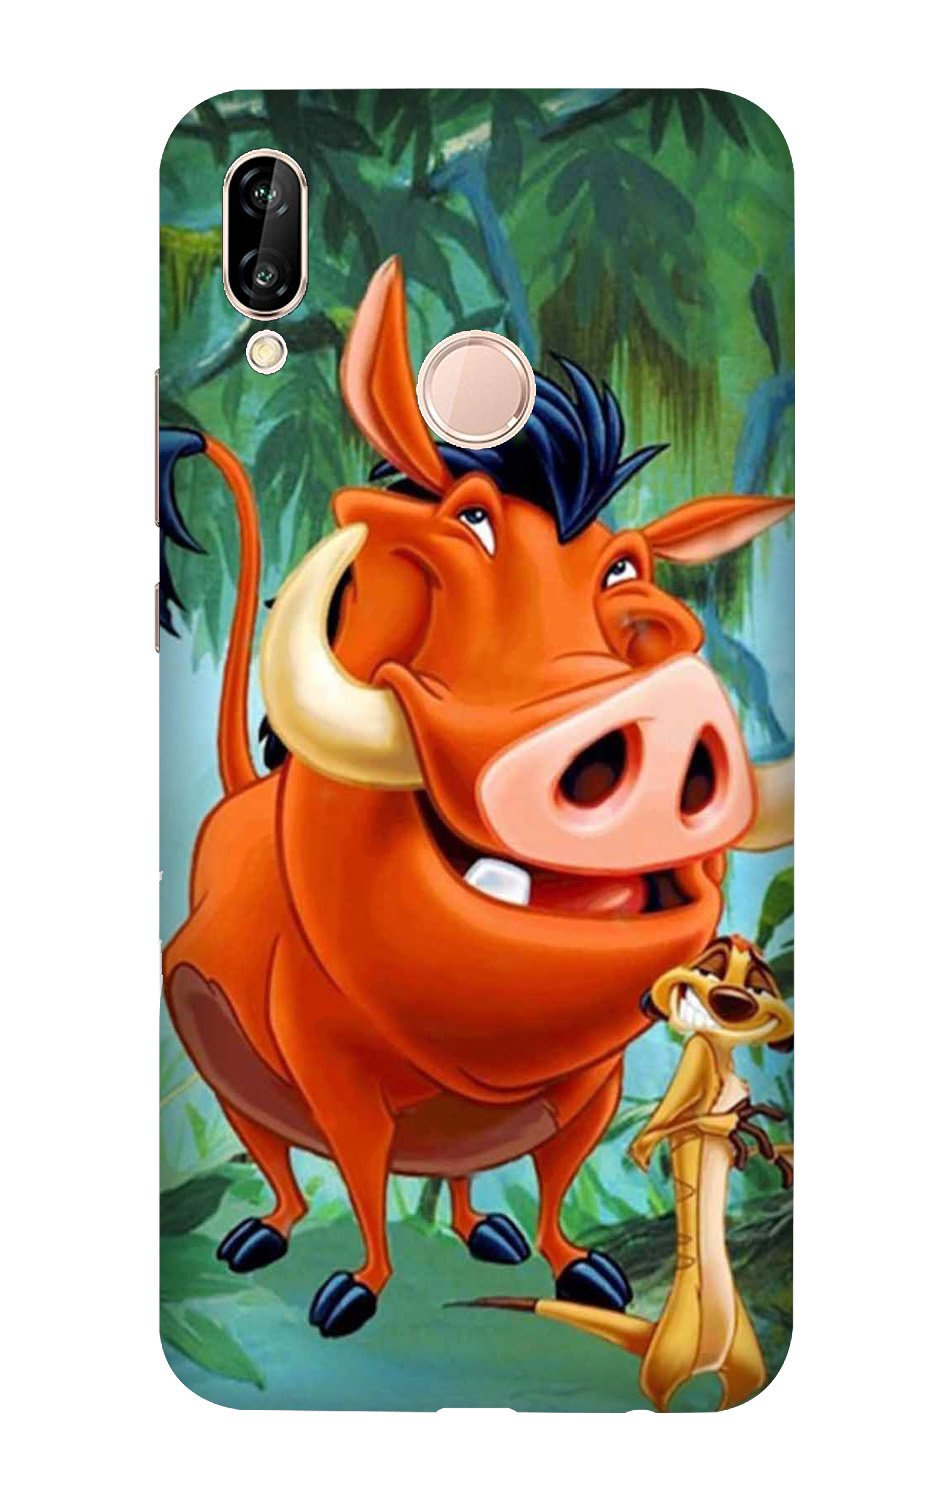 Timon and Pumbaa Mobile Back Case for Vivo Y83 Pro (Design - 305)